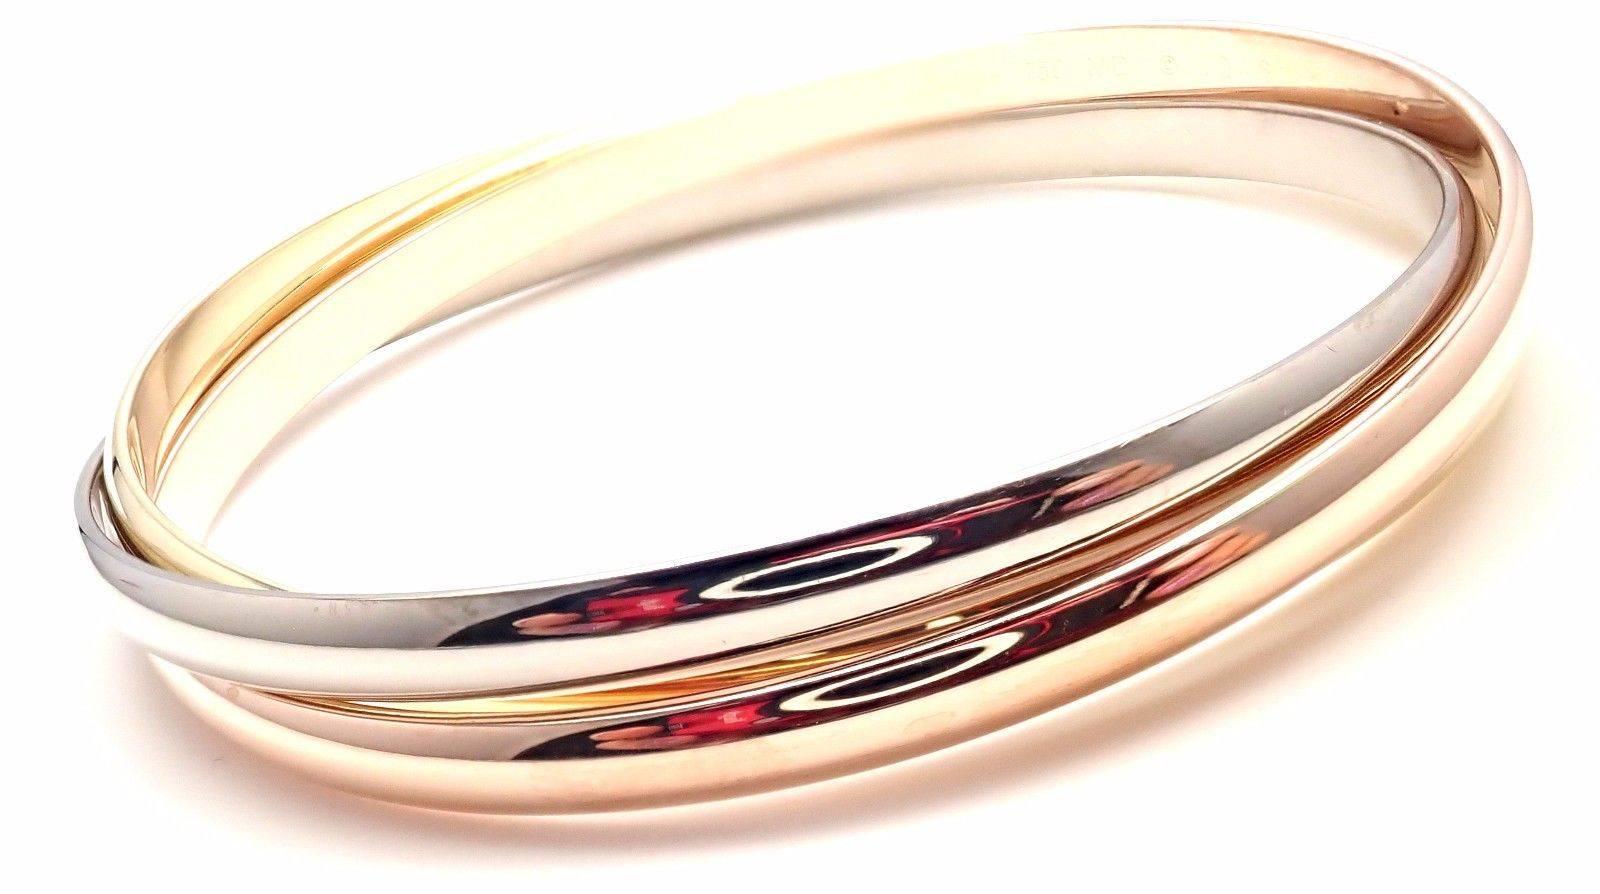 Cartier Trinity Rolling Tri-Colored Gold Bangle Bracelet 1